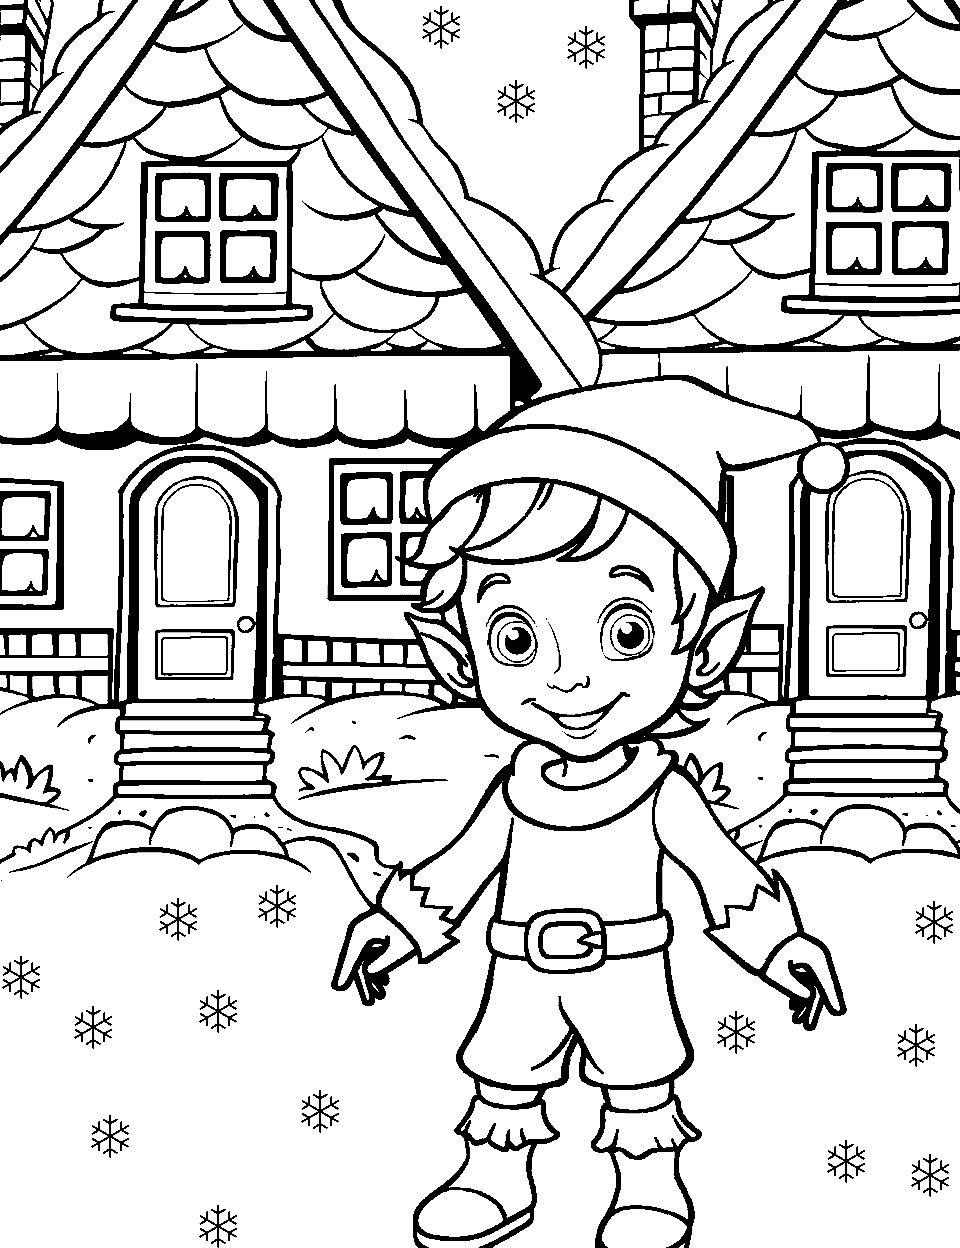 Winter Elf in a Snowy Neighbourhood Coloring Page - An elf in winter clothing, strolling through snow-covered households.